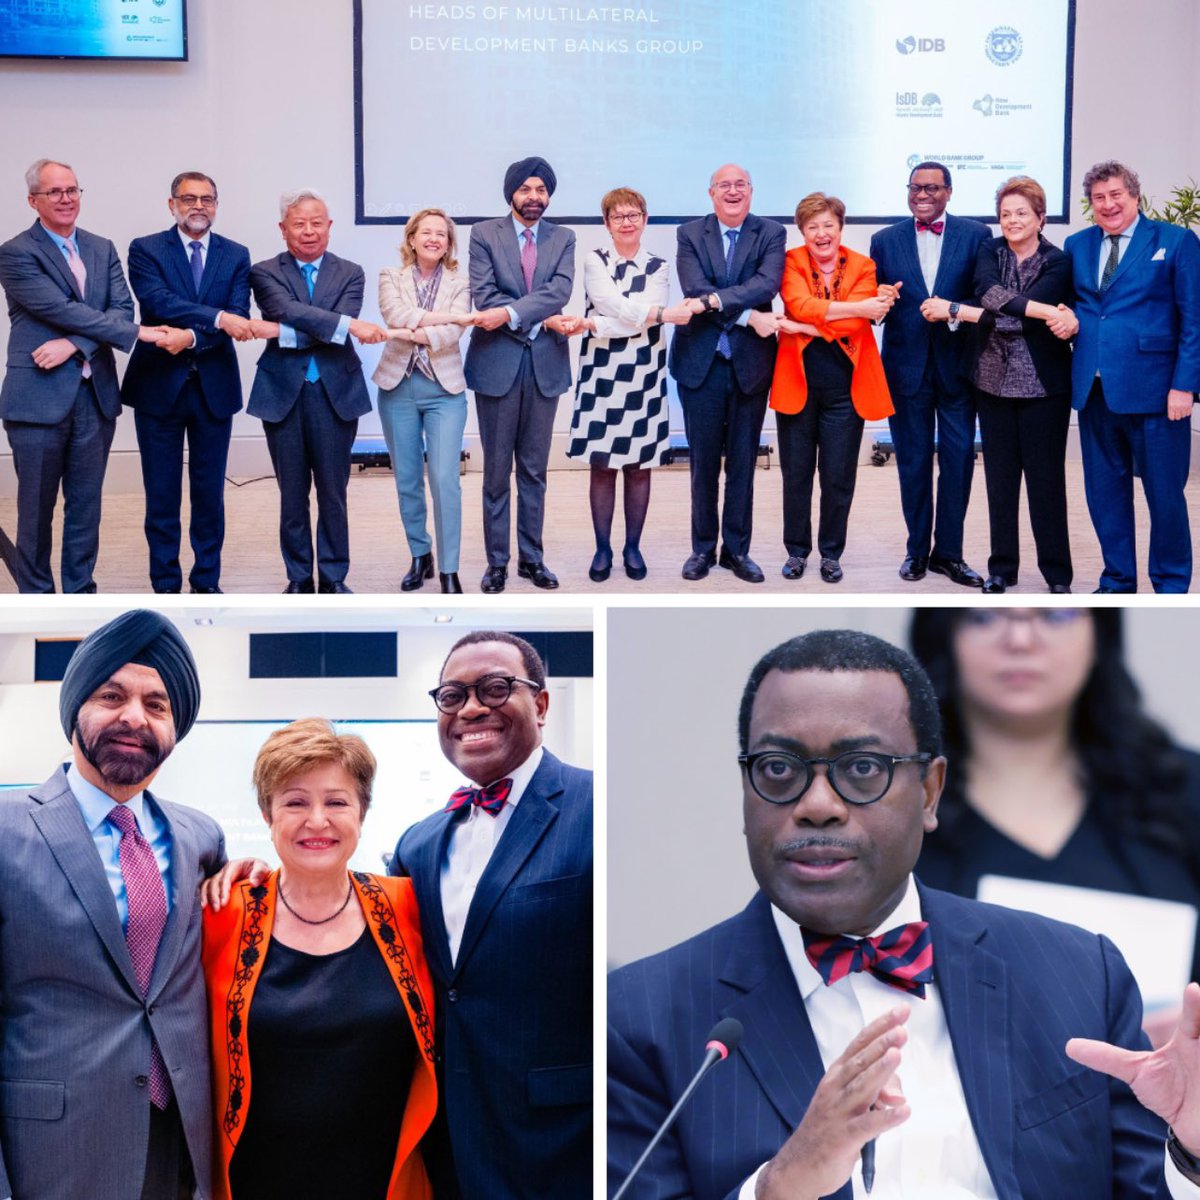 I am so excited that the heads of 10 multilateral development banks (#MDBs) including @AfDB_Group @akin_adesina today announced joint steps to deliver greater impact and scale by working better together to tackle urgent challenges: bit.ly/3Uqh84j #WBGMeetings